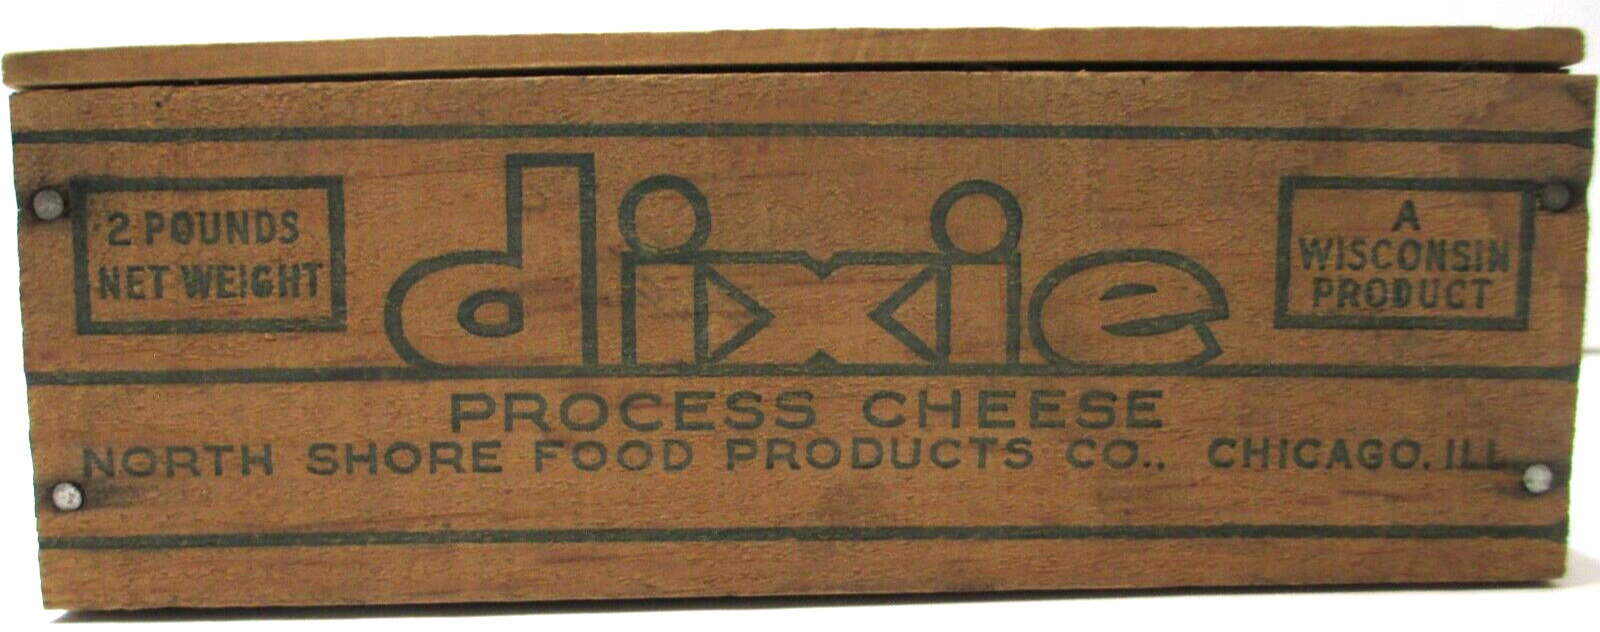 Vintage Dixie Process Cheese Wood Box 2 lb North Shore Food Products Chicago ILL